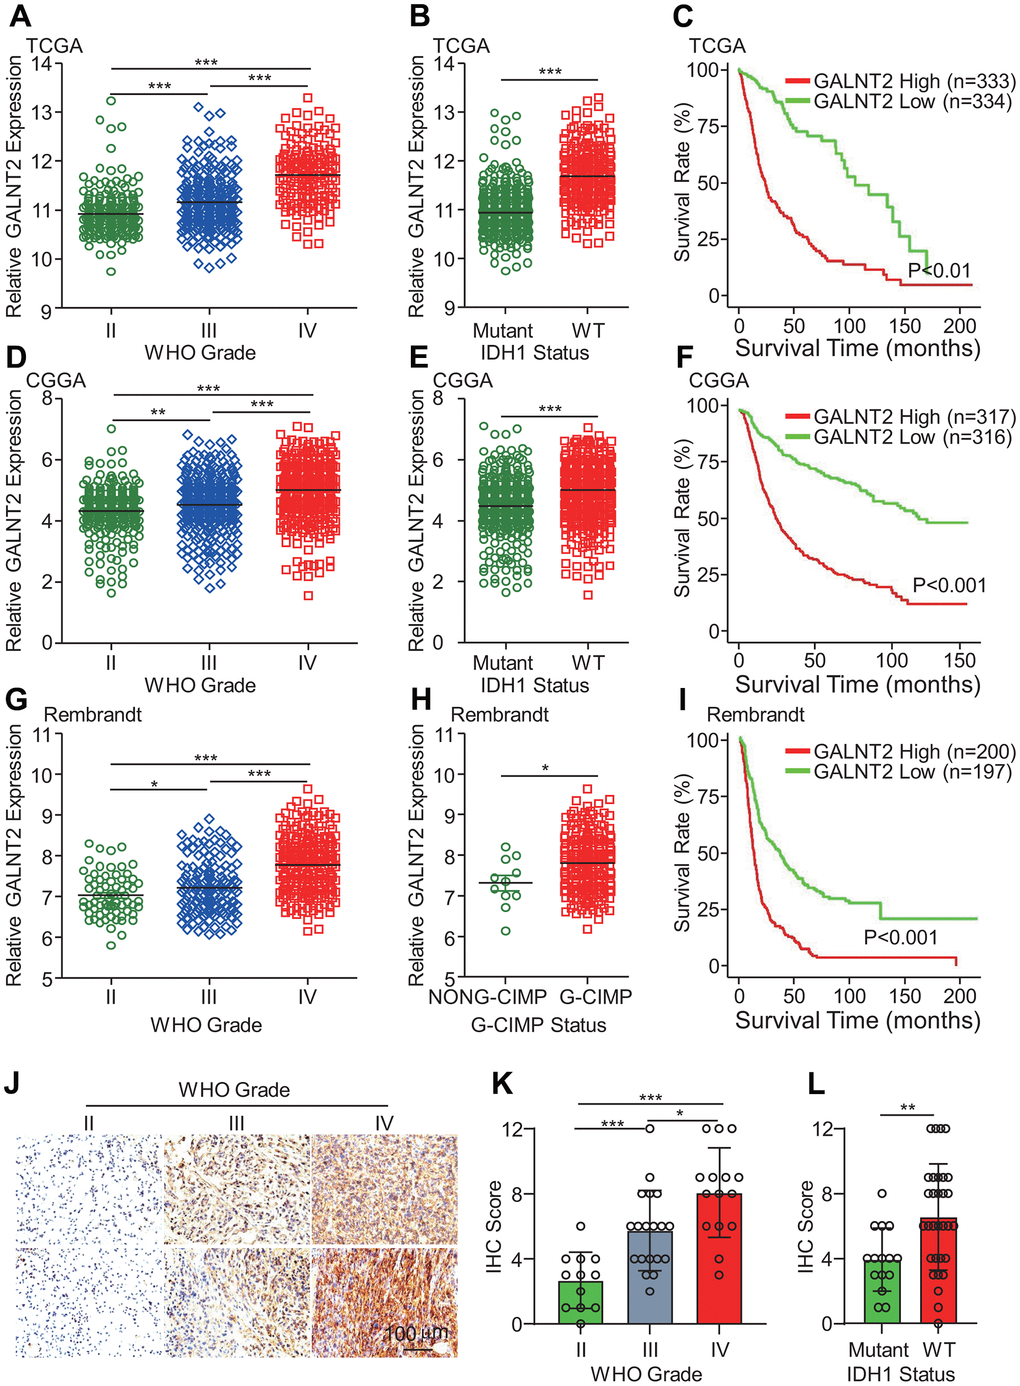 GALNT2 expression was highly expressed in GBM and IDH1 wildtype GBM. (A, D, G) GALNT2 expression was increased in WHO IV glioma in TCGA (A), CGGA (D), and Rembrandt (G) data sets. (B, E, H) GALNT2 expression was markedly elevated in IDH-wildtype gliomas in TCGA (B) and CGGA (E) and Rembrandt (H) data sets. (C, F, I) Increased GALNT2 expression predicts a poor prognosis of glioma patients assessed by Kaplan-Meier curves in TCGA (C) and CGGA (F), and Rembrandt (I) data sets. (J) GALNT2 protein expression was convincingly increased in WHO IV glioma. Representative images of IHC staining of GALNT2 protein in different grades of glioma specimens were shown. Scale bar: 100 μm. (K) Correlation between GALNT2 protein expression and WHO grades of gliomas. Clinical glioma specimens from 46 glioma patients were IHC-stained with anti-GALNT2 primary antibody. (L) GALNT2 expression was elevated in IDH1 wildtype group glioma patients. *, ** and *** indicate p 